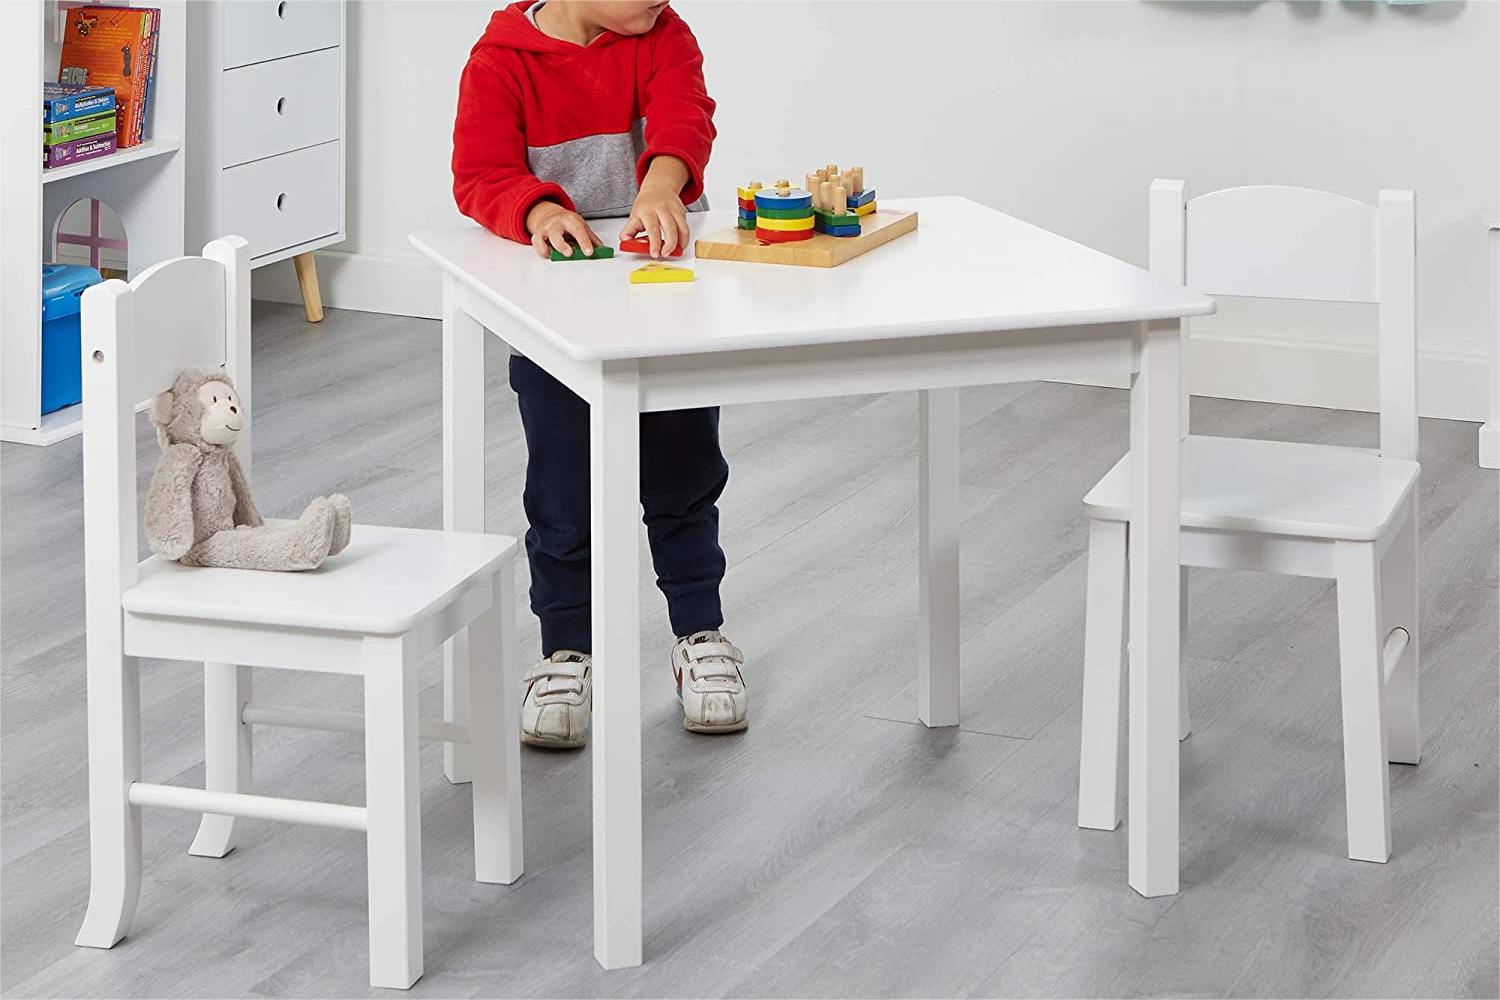 Five Safety Tips For Wooden Children's Furniture